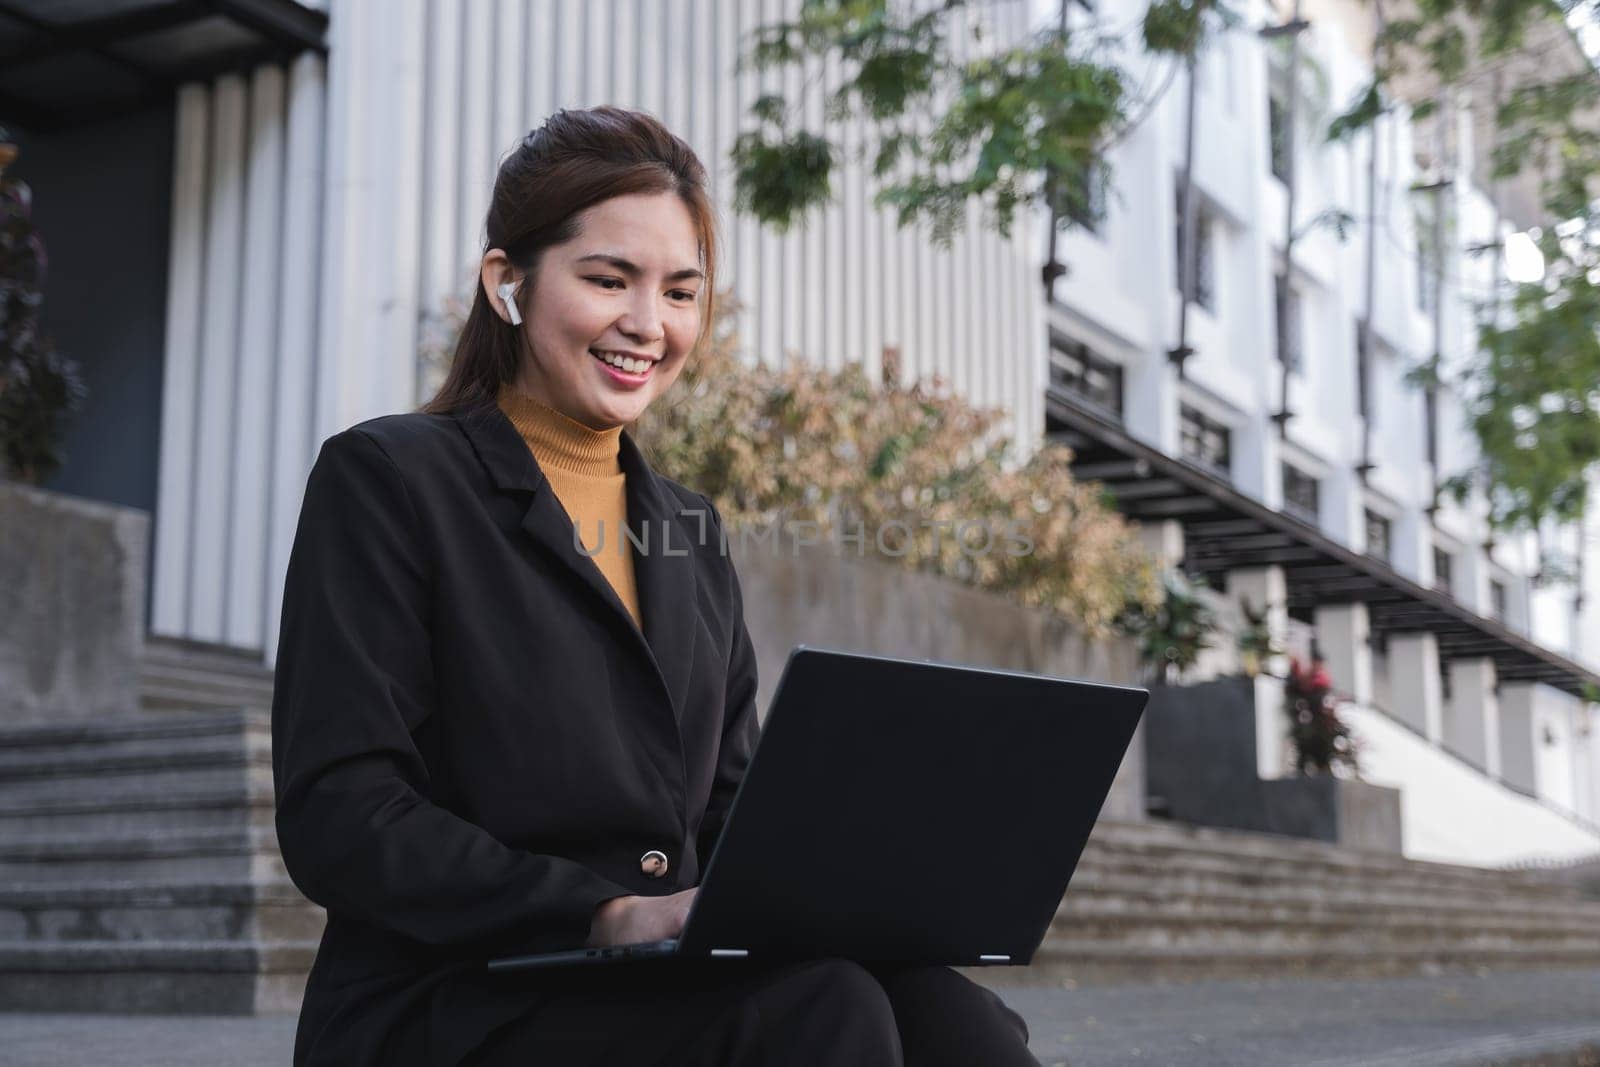 A woman in a black suit is sitting on a step with a laptop in front of her. She is smiling and she is enjoying her work